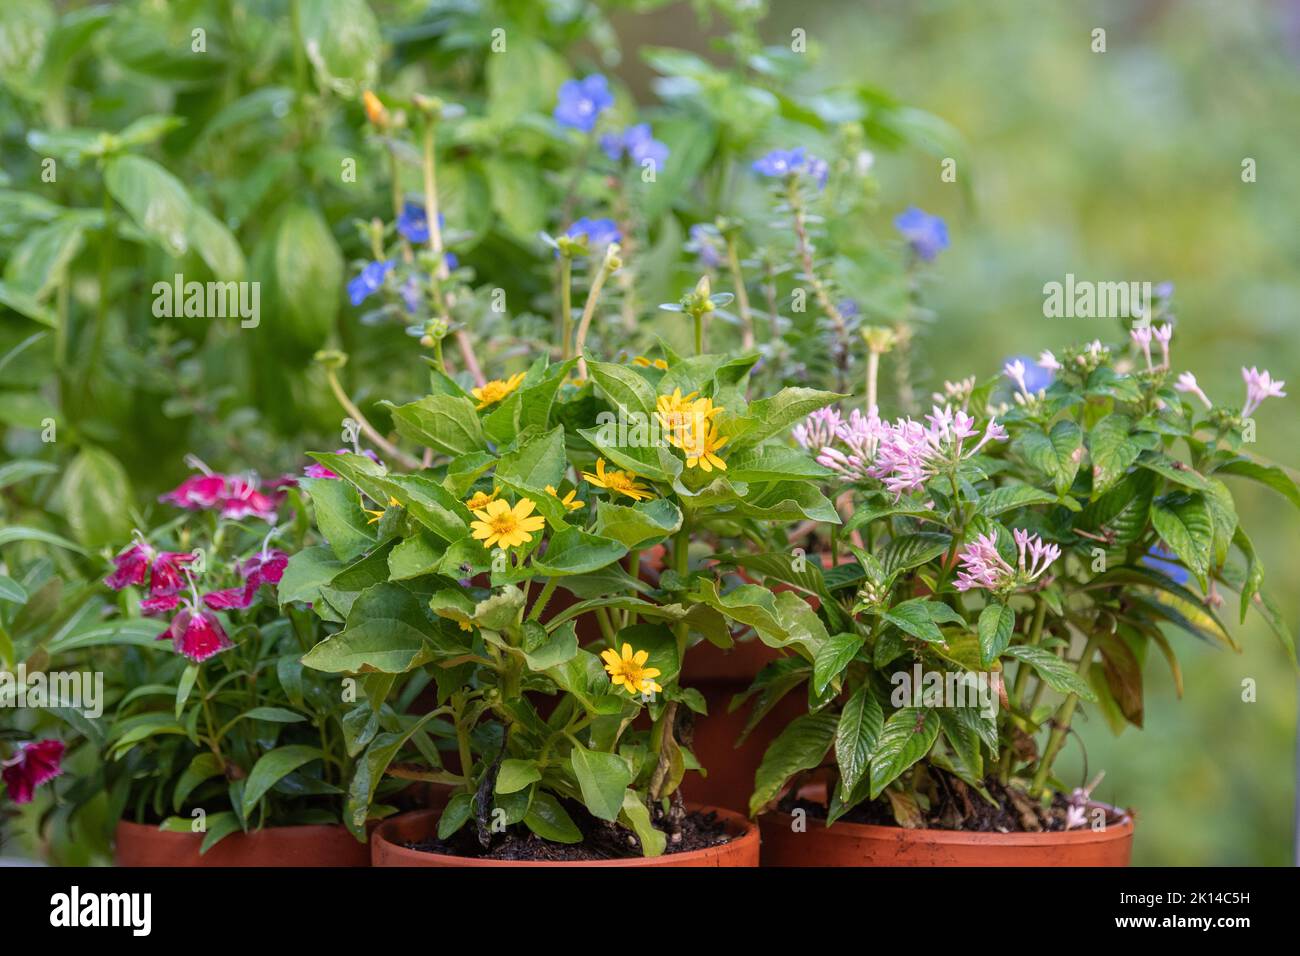 Blue daze, dianthus, melampodium, and penta blooming on a summer day. Stock Photo